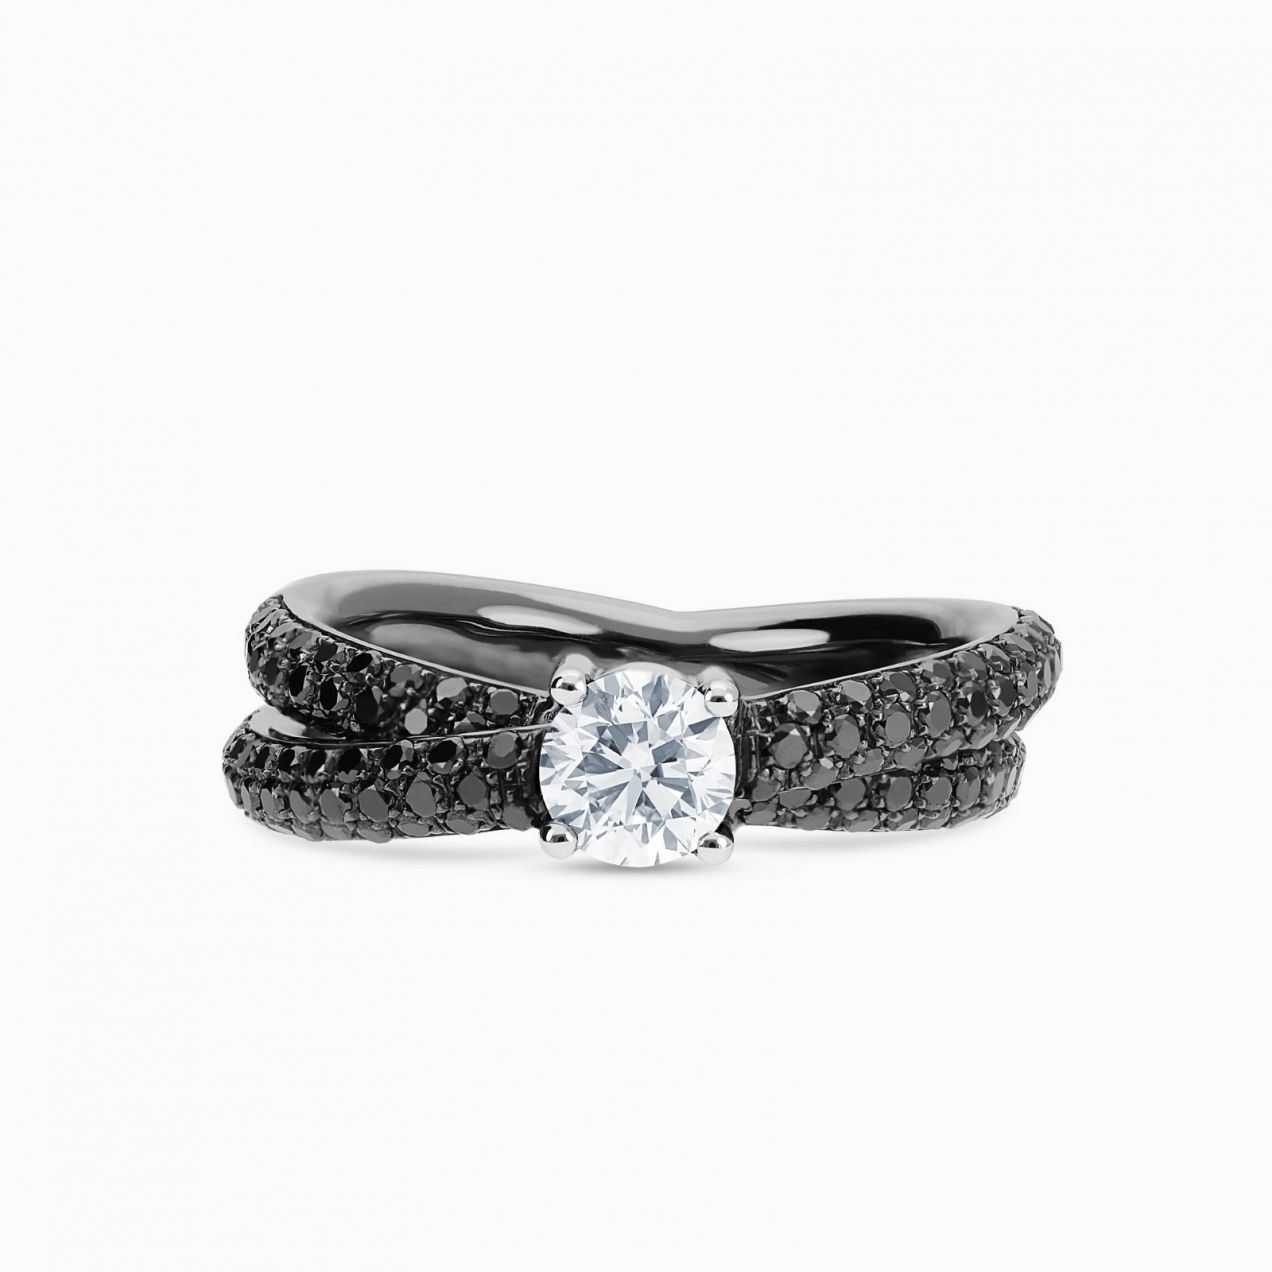 Black rhodium plated gold cross ring with black diamonds and white central diamond